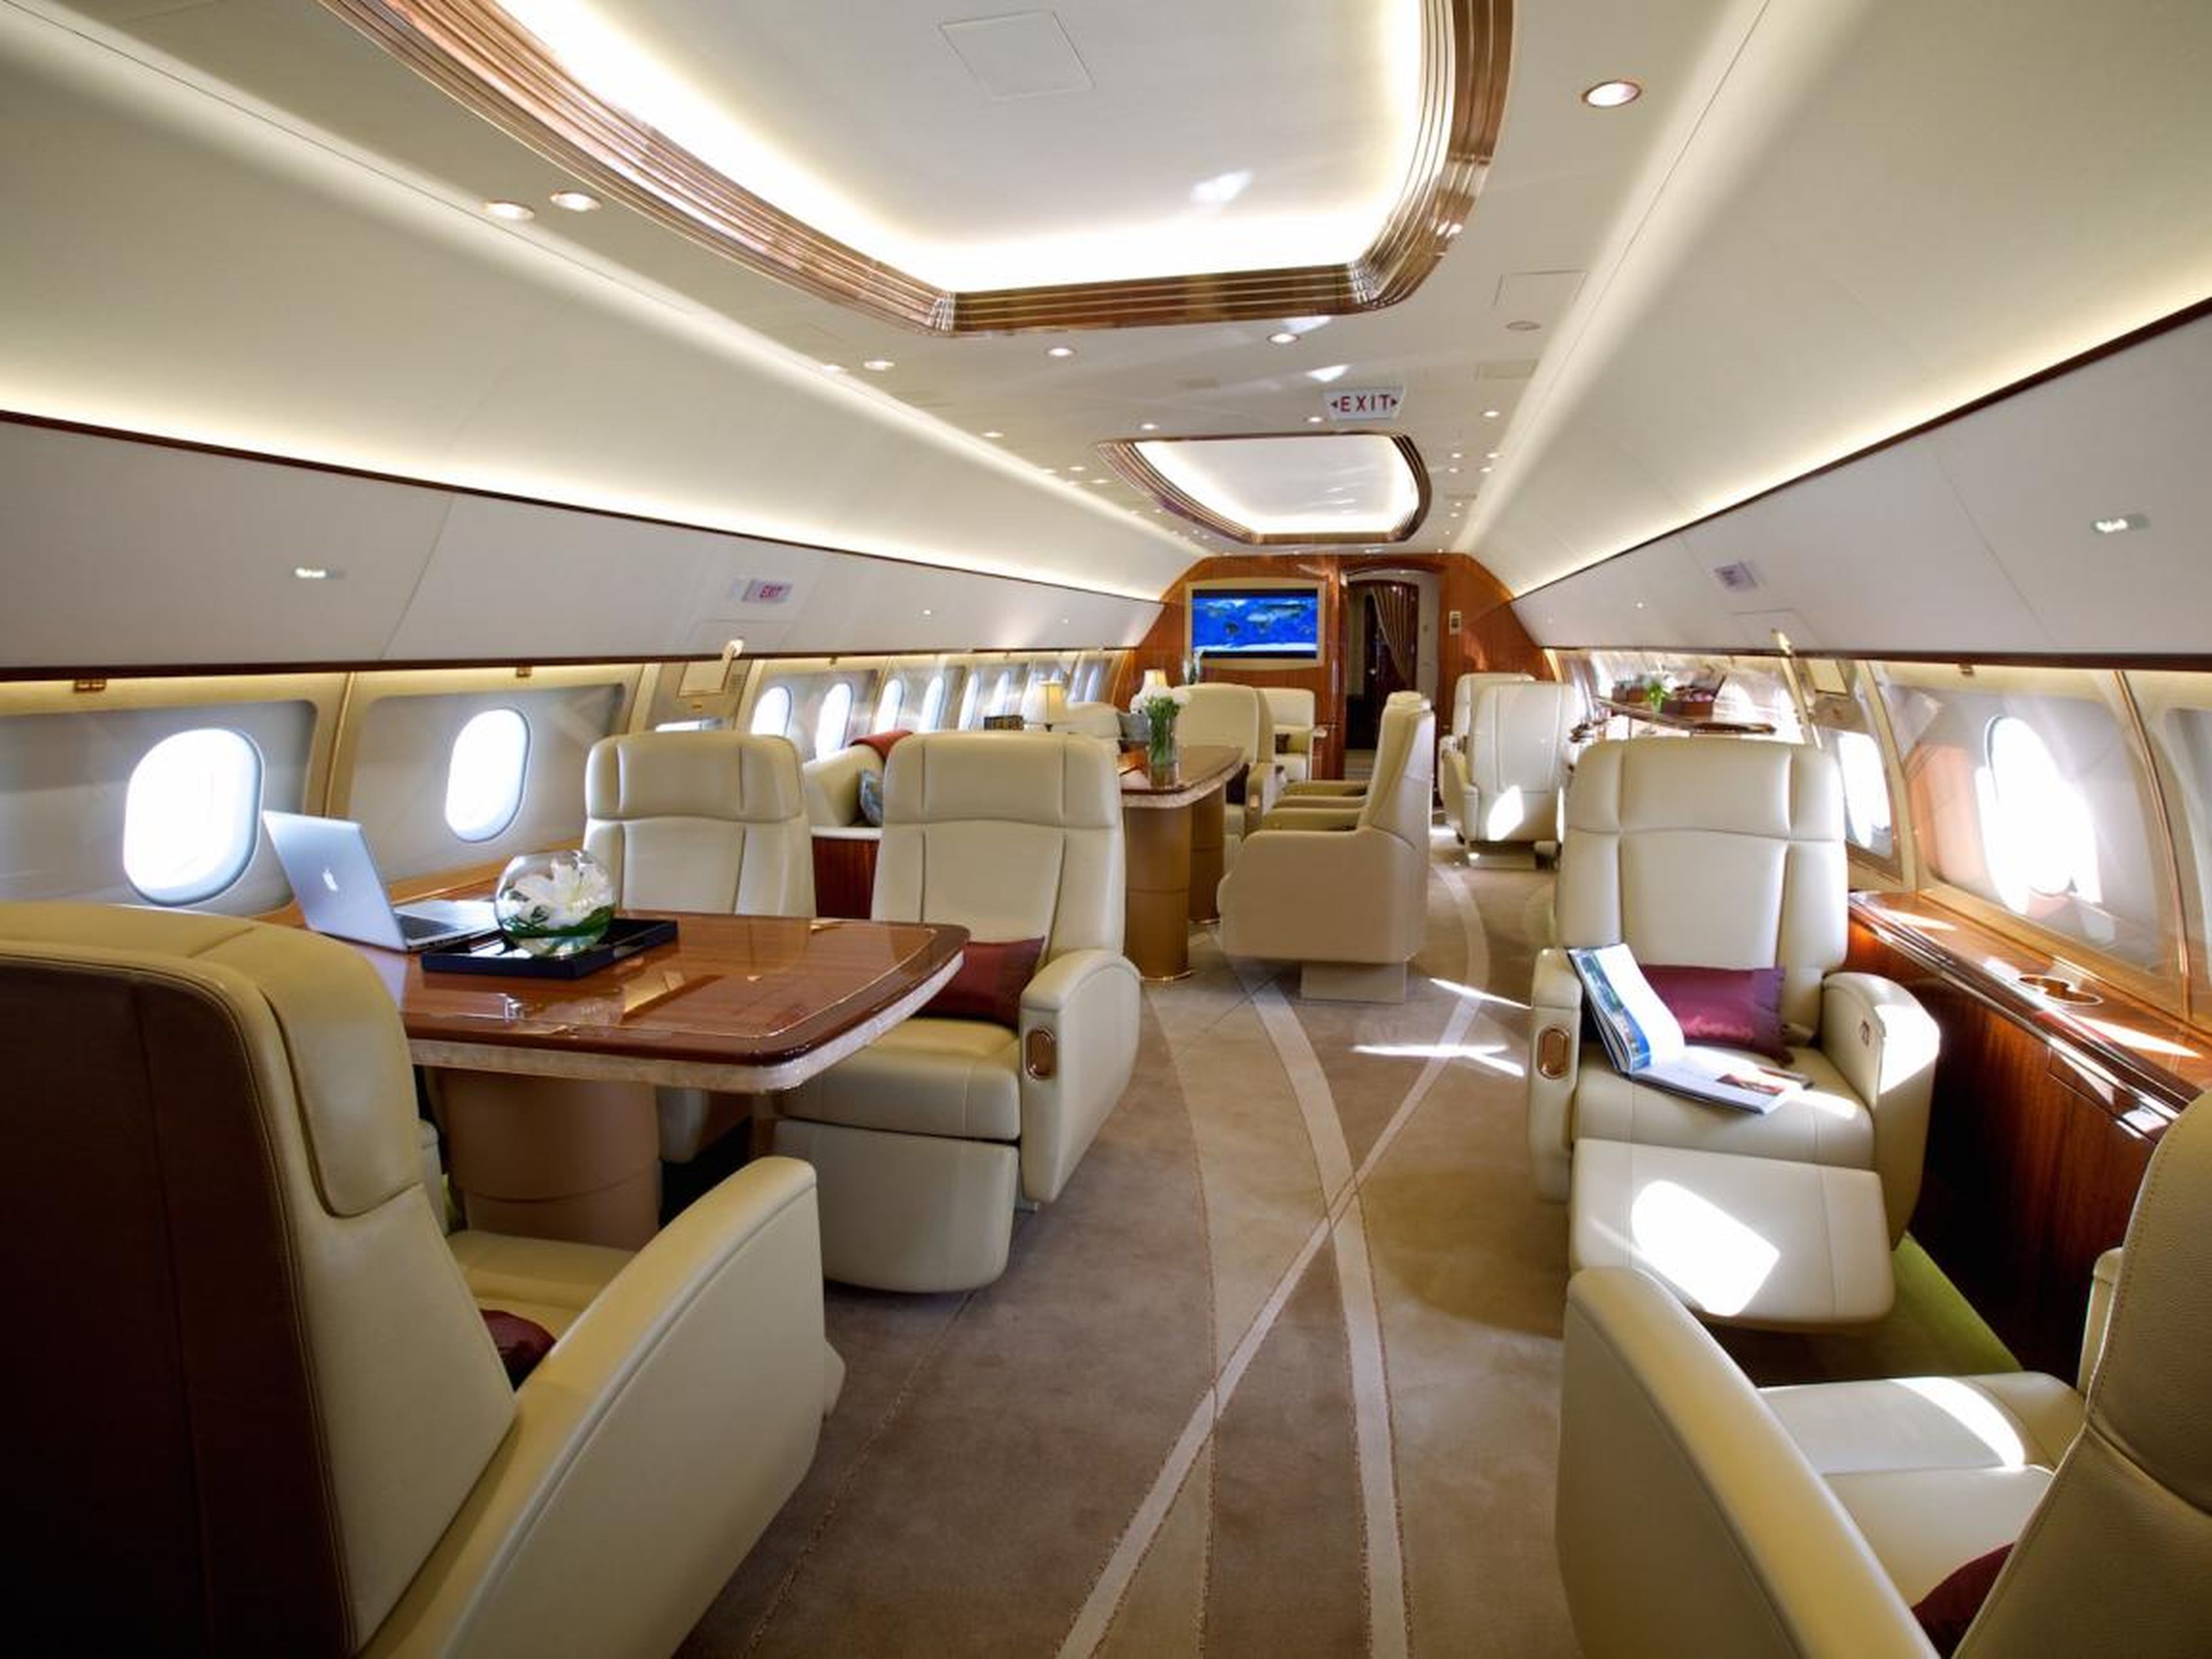 The ACJ319neo costs $101.5 million before the installation of custom interior fittings. The jet has a range of nearly 7,800 miles and can fly nonstop from Los Angeles to Geneva, Switzerland.